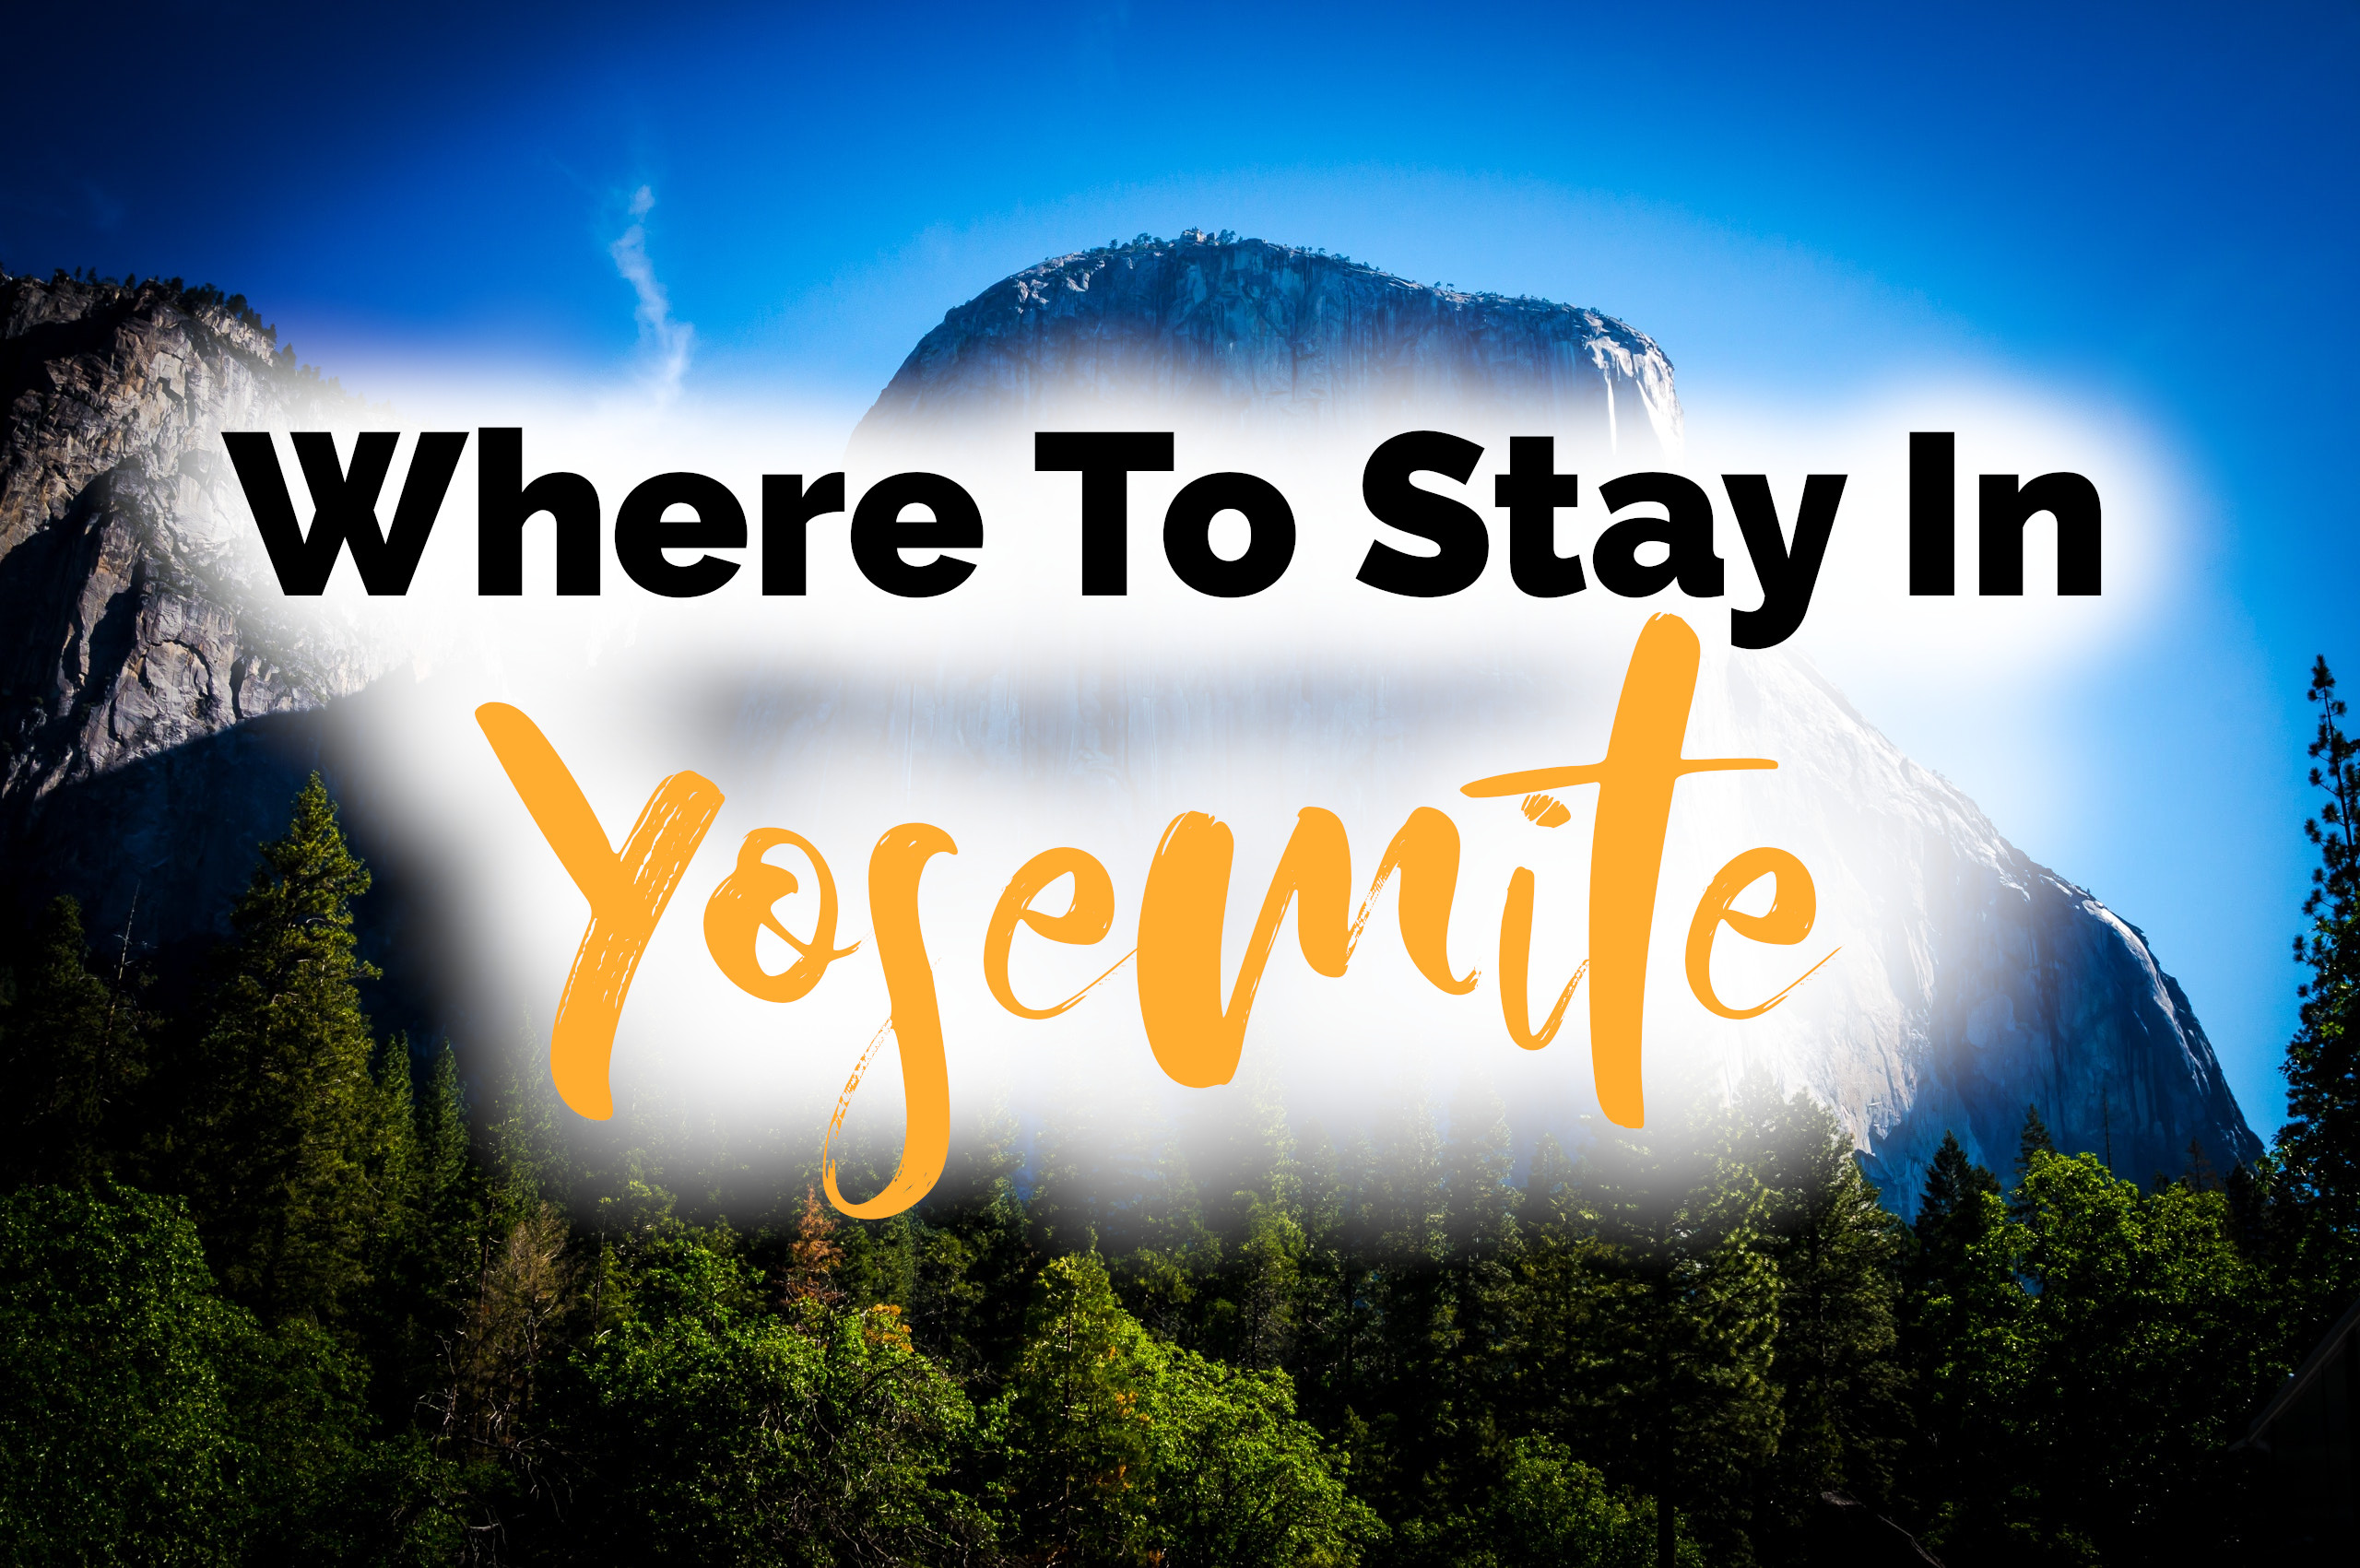 Where to Stay in Yosemite